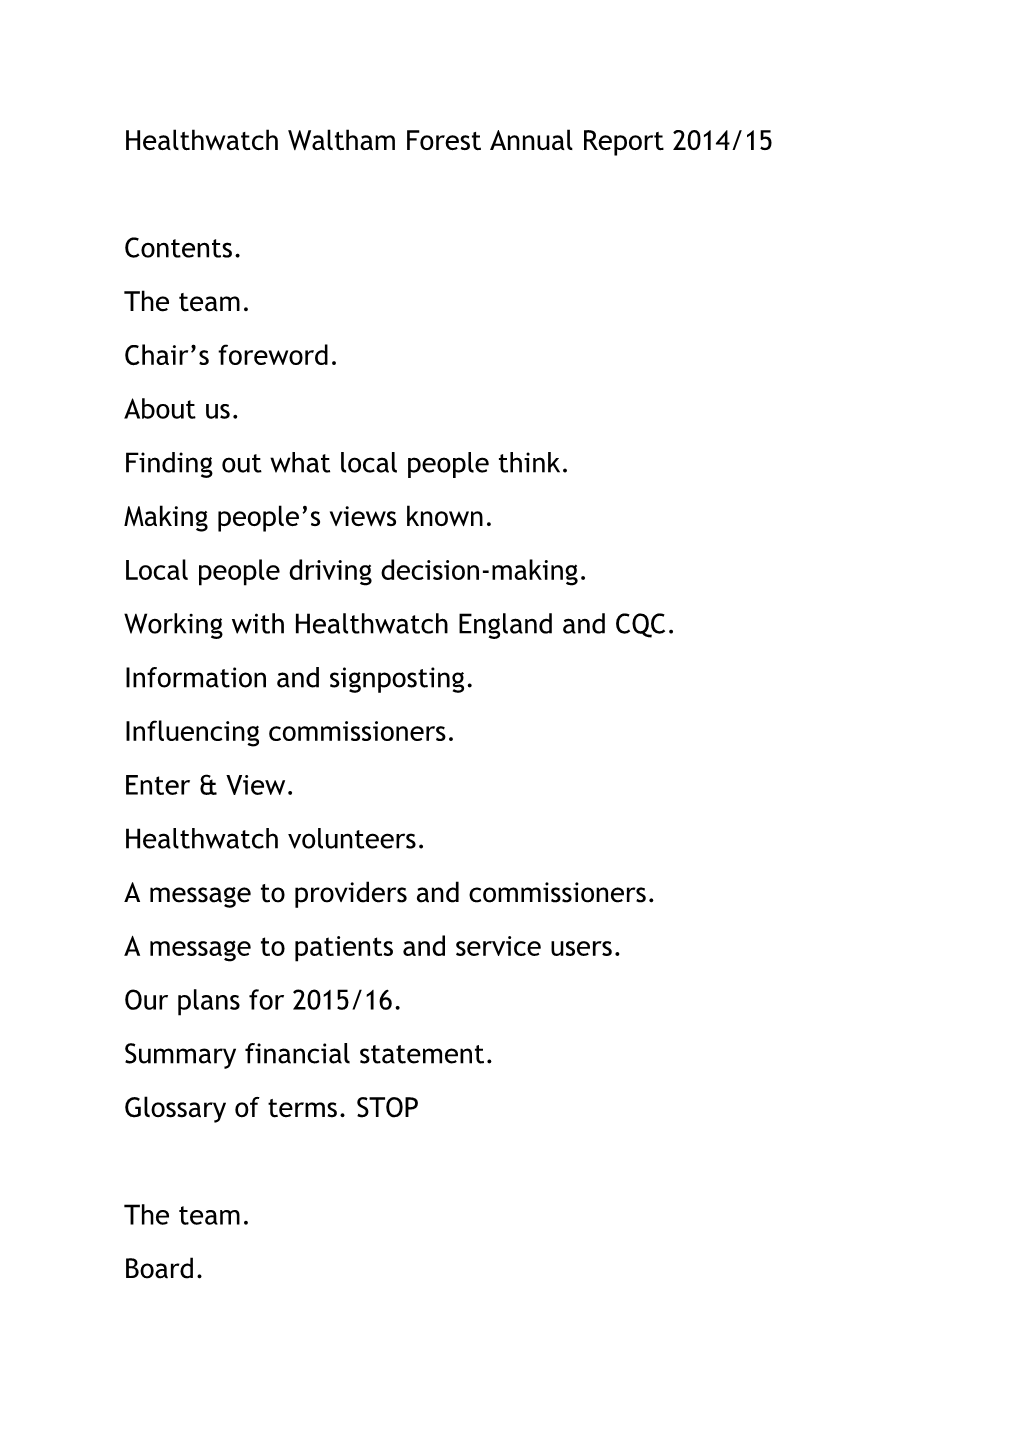 Healthwatch Waltham Forest Annual Report 2014/15